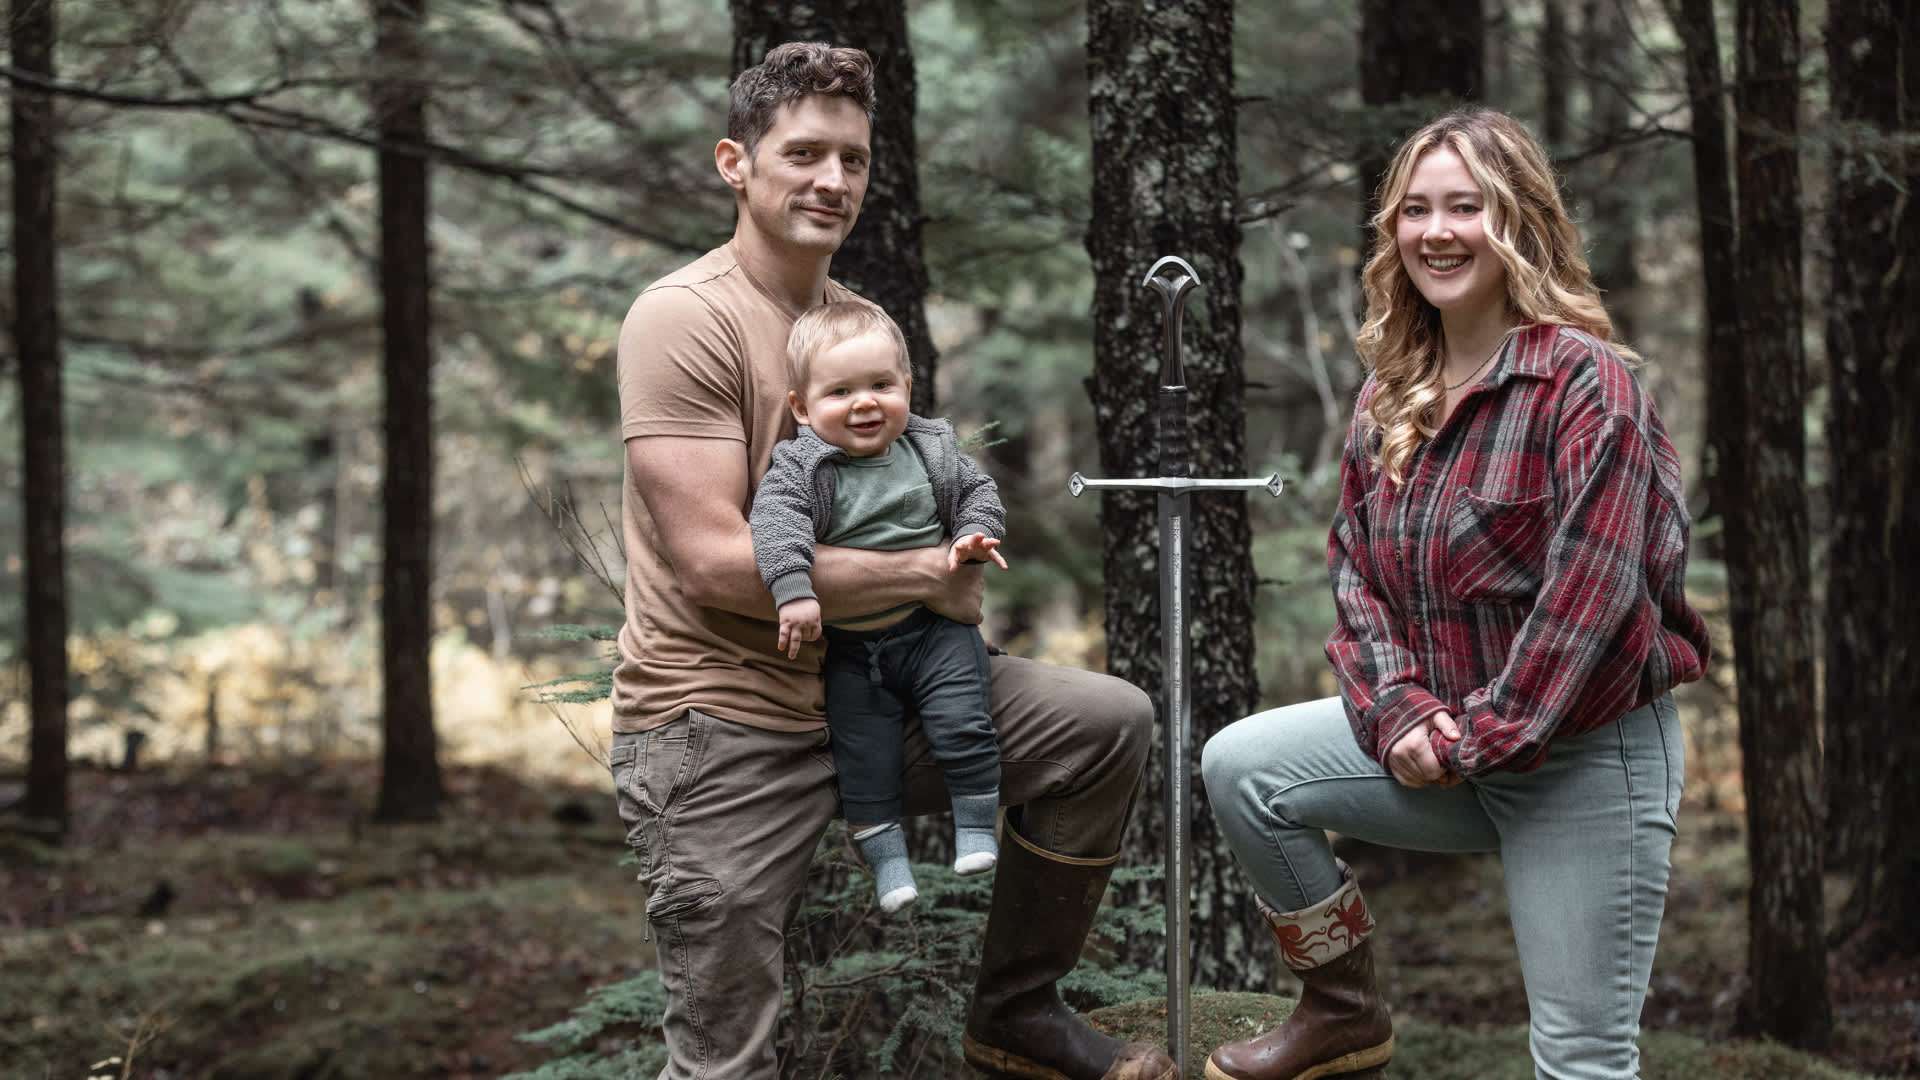 How a millennial couple earning $52,000 a year in Alaska spend their money